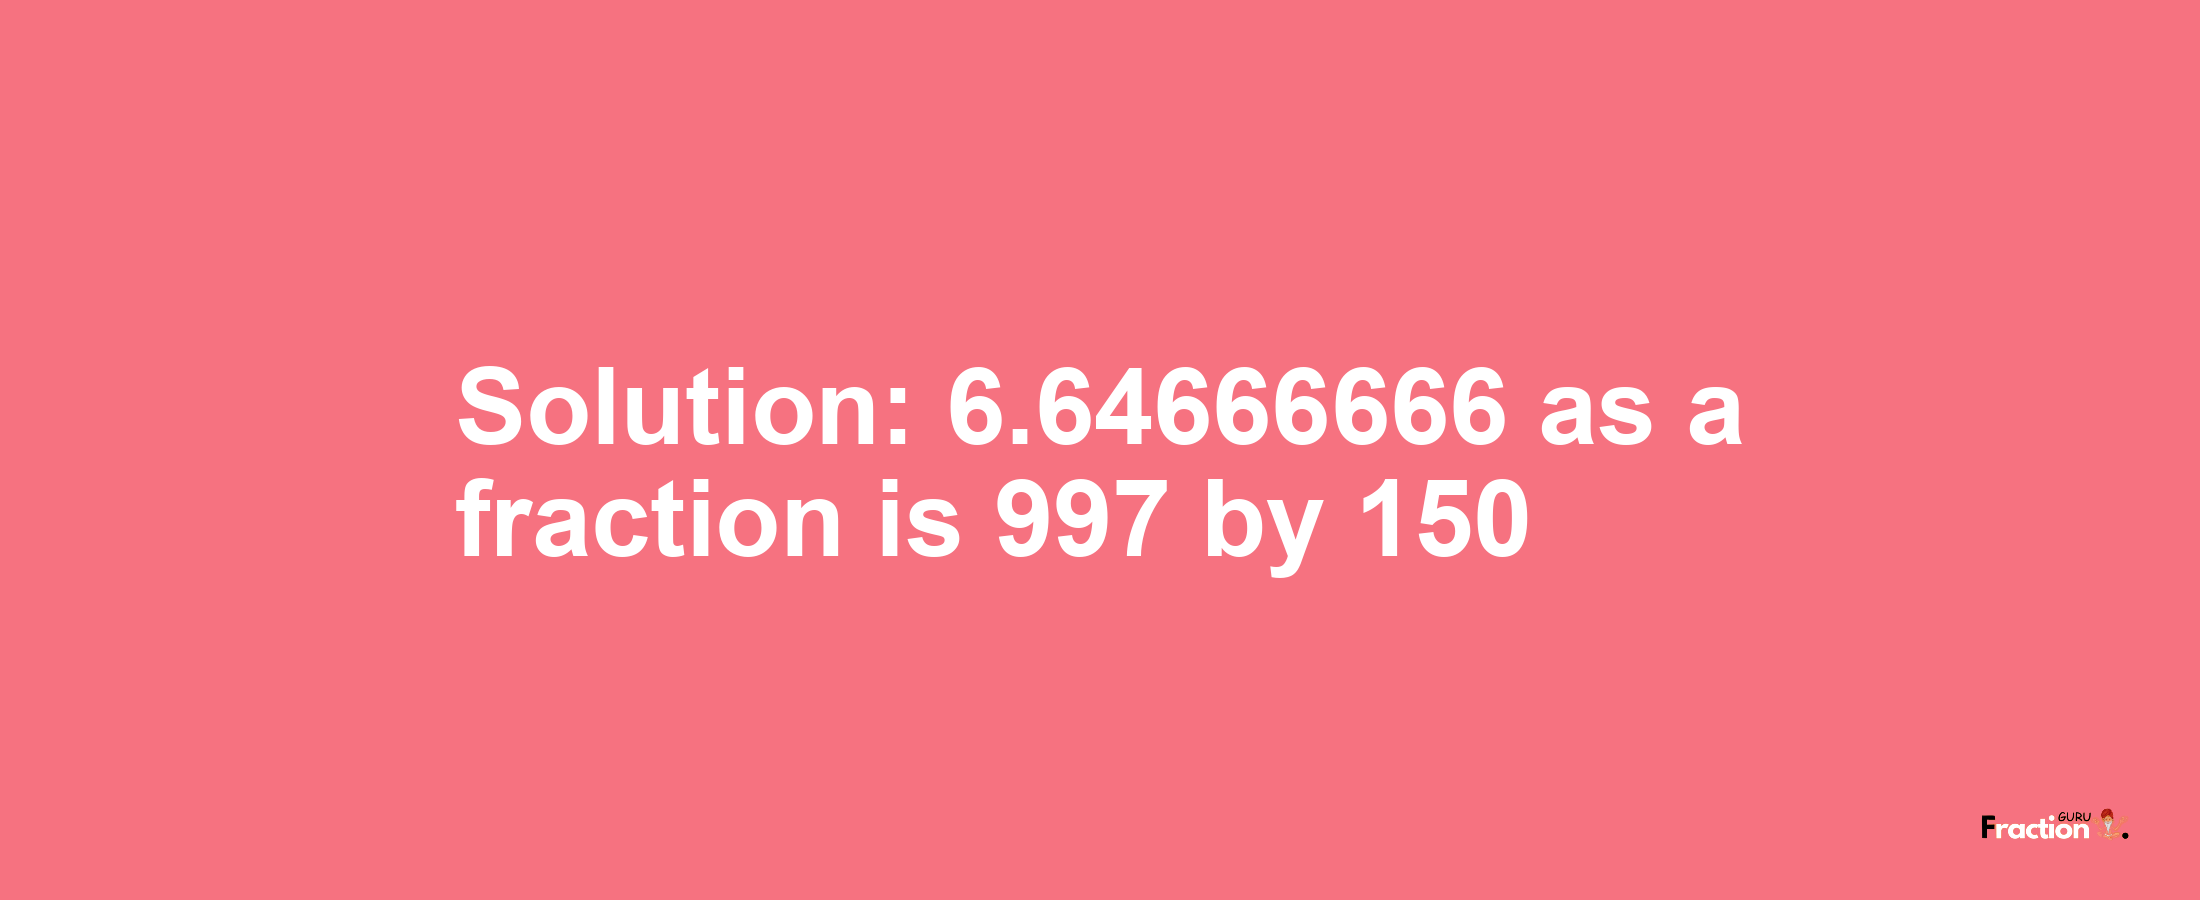 Solution:6.64666666 as a fraction is 997/150